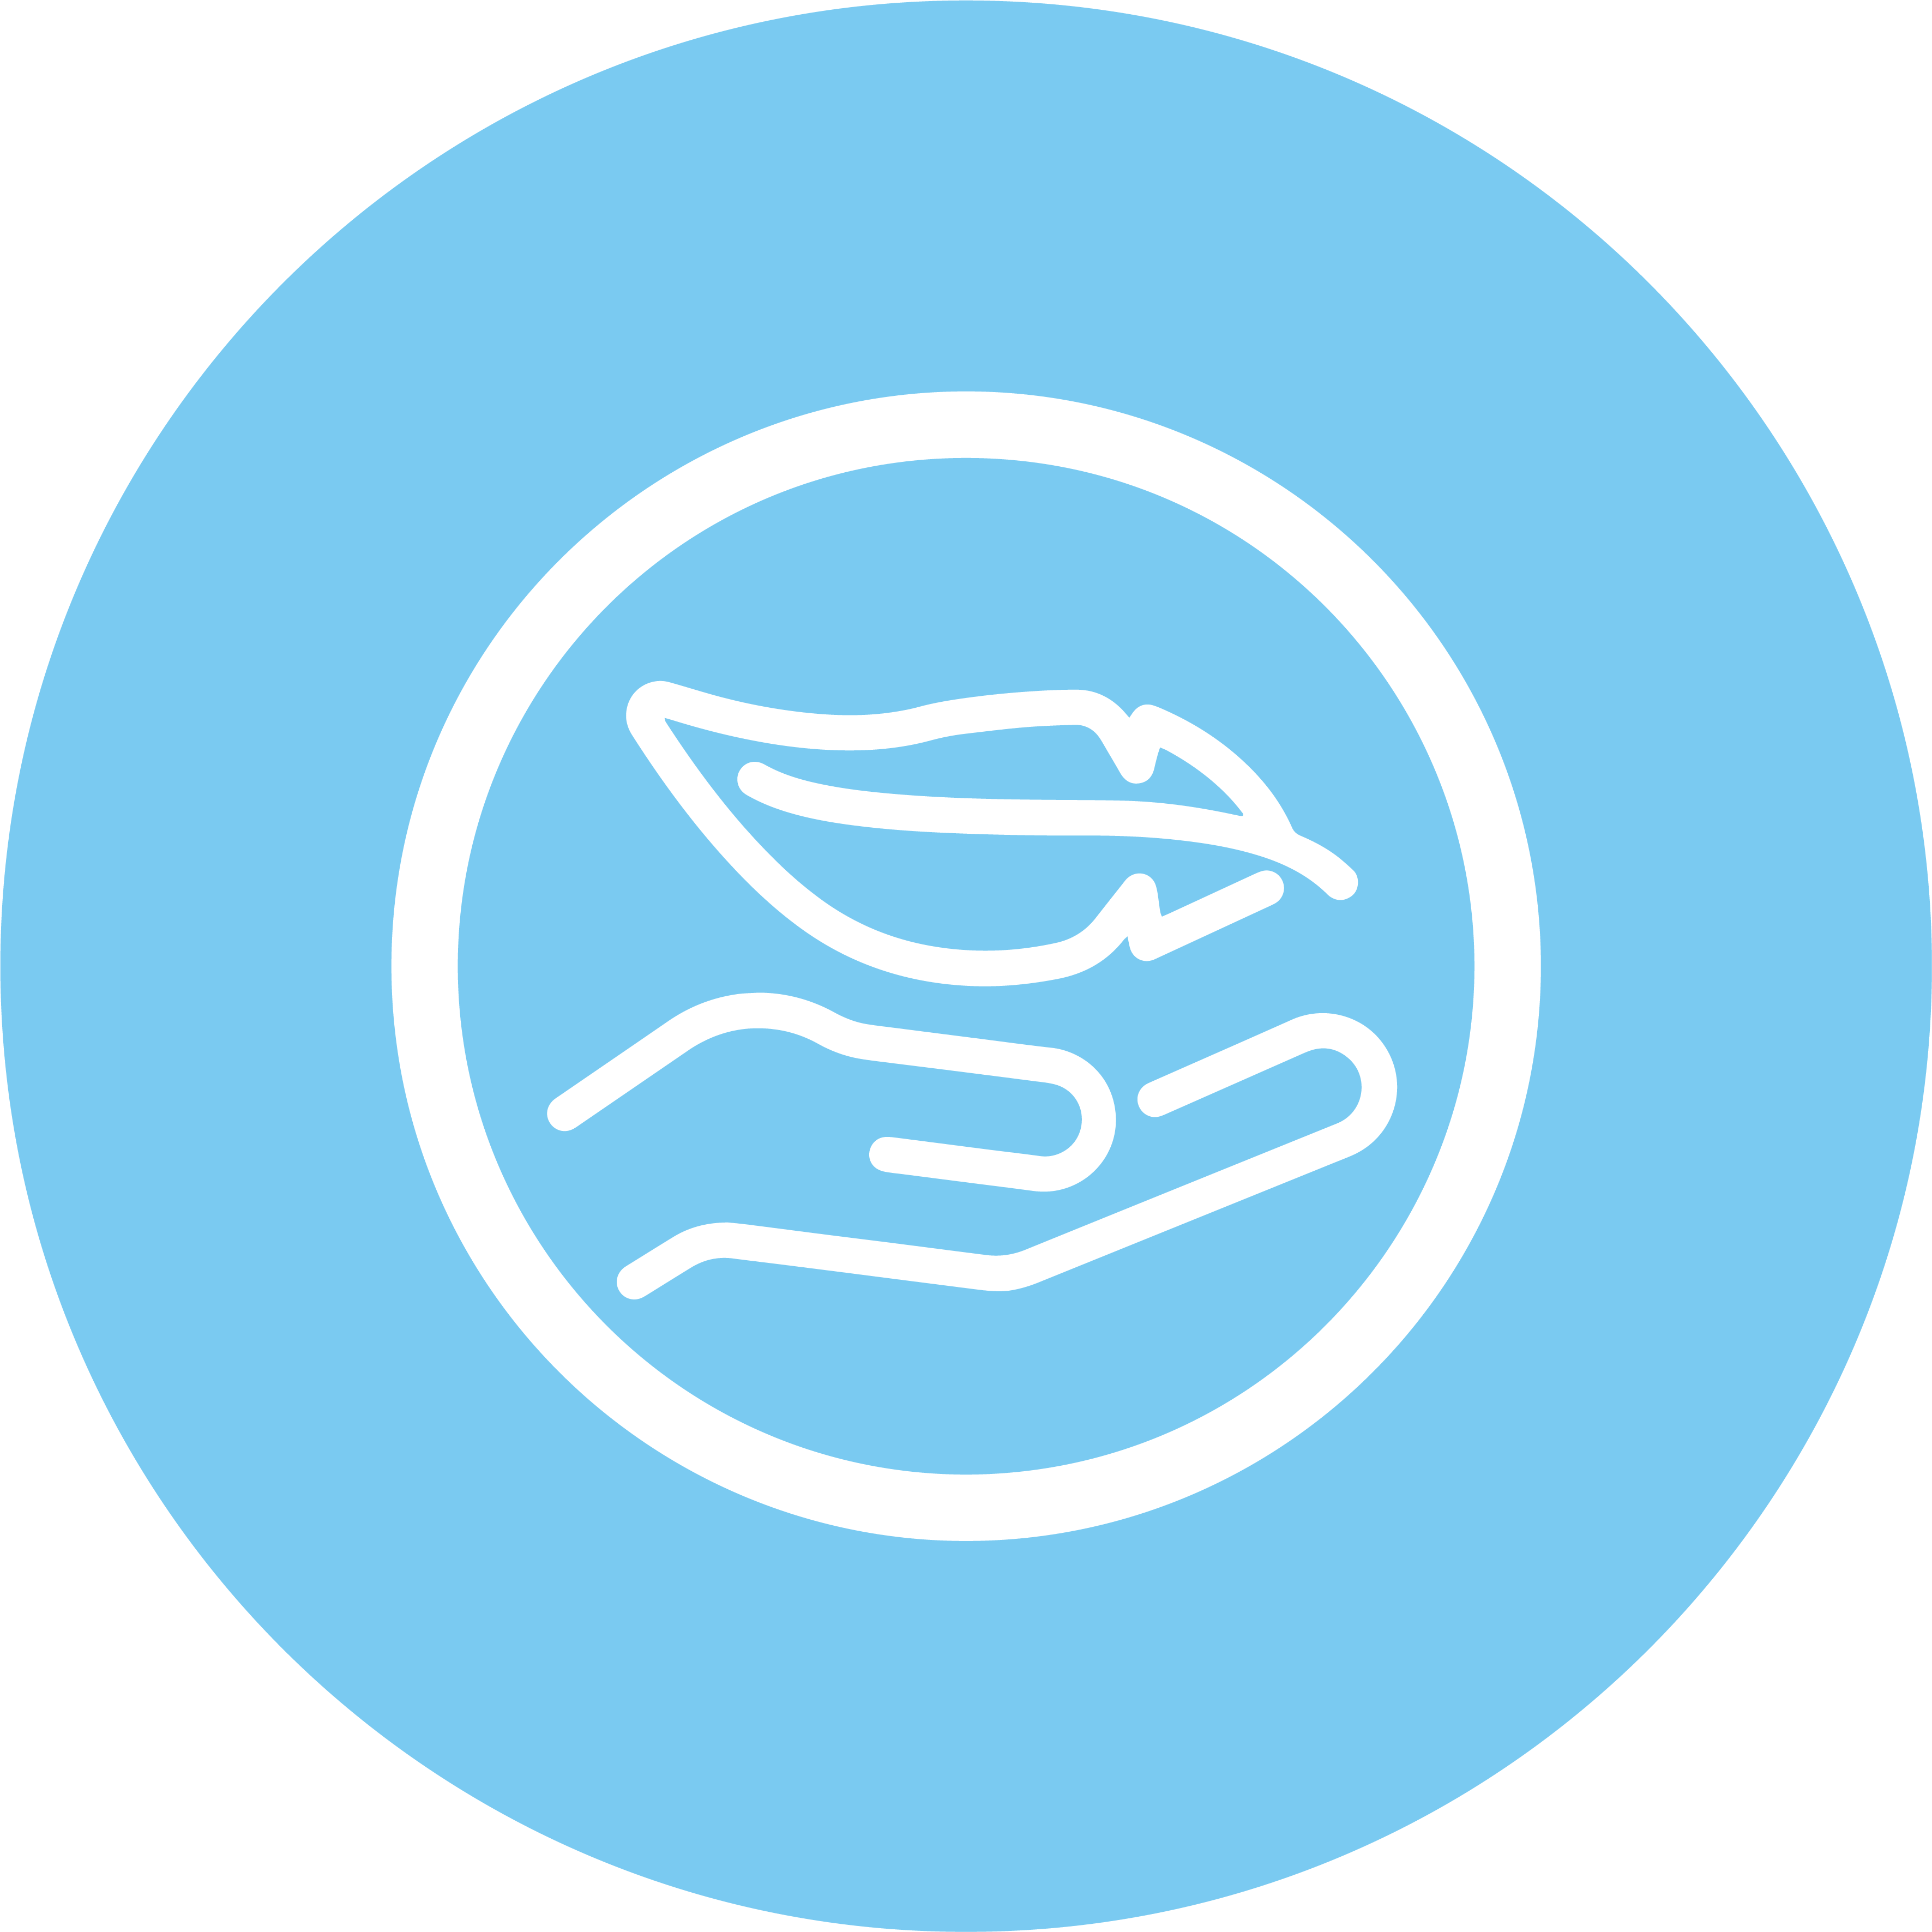 Gentle hands icon on blue background